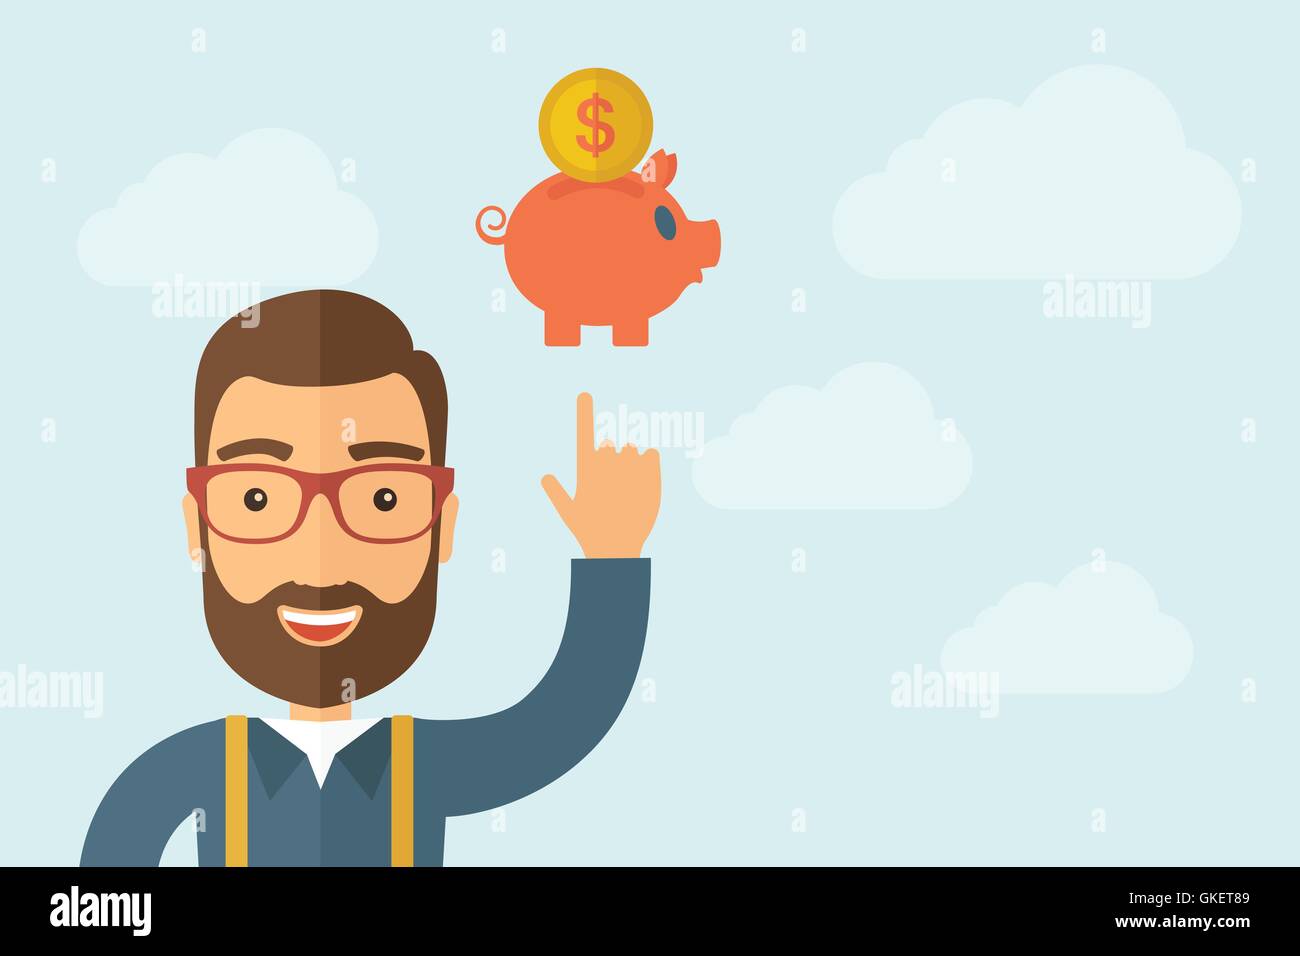 Man pointing the piggy bank icon Stock Vector